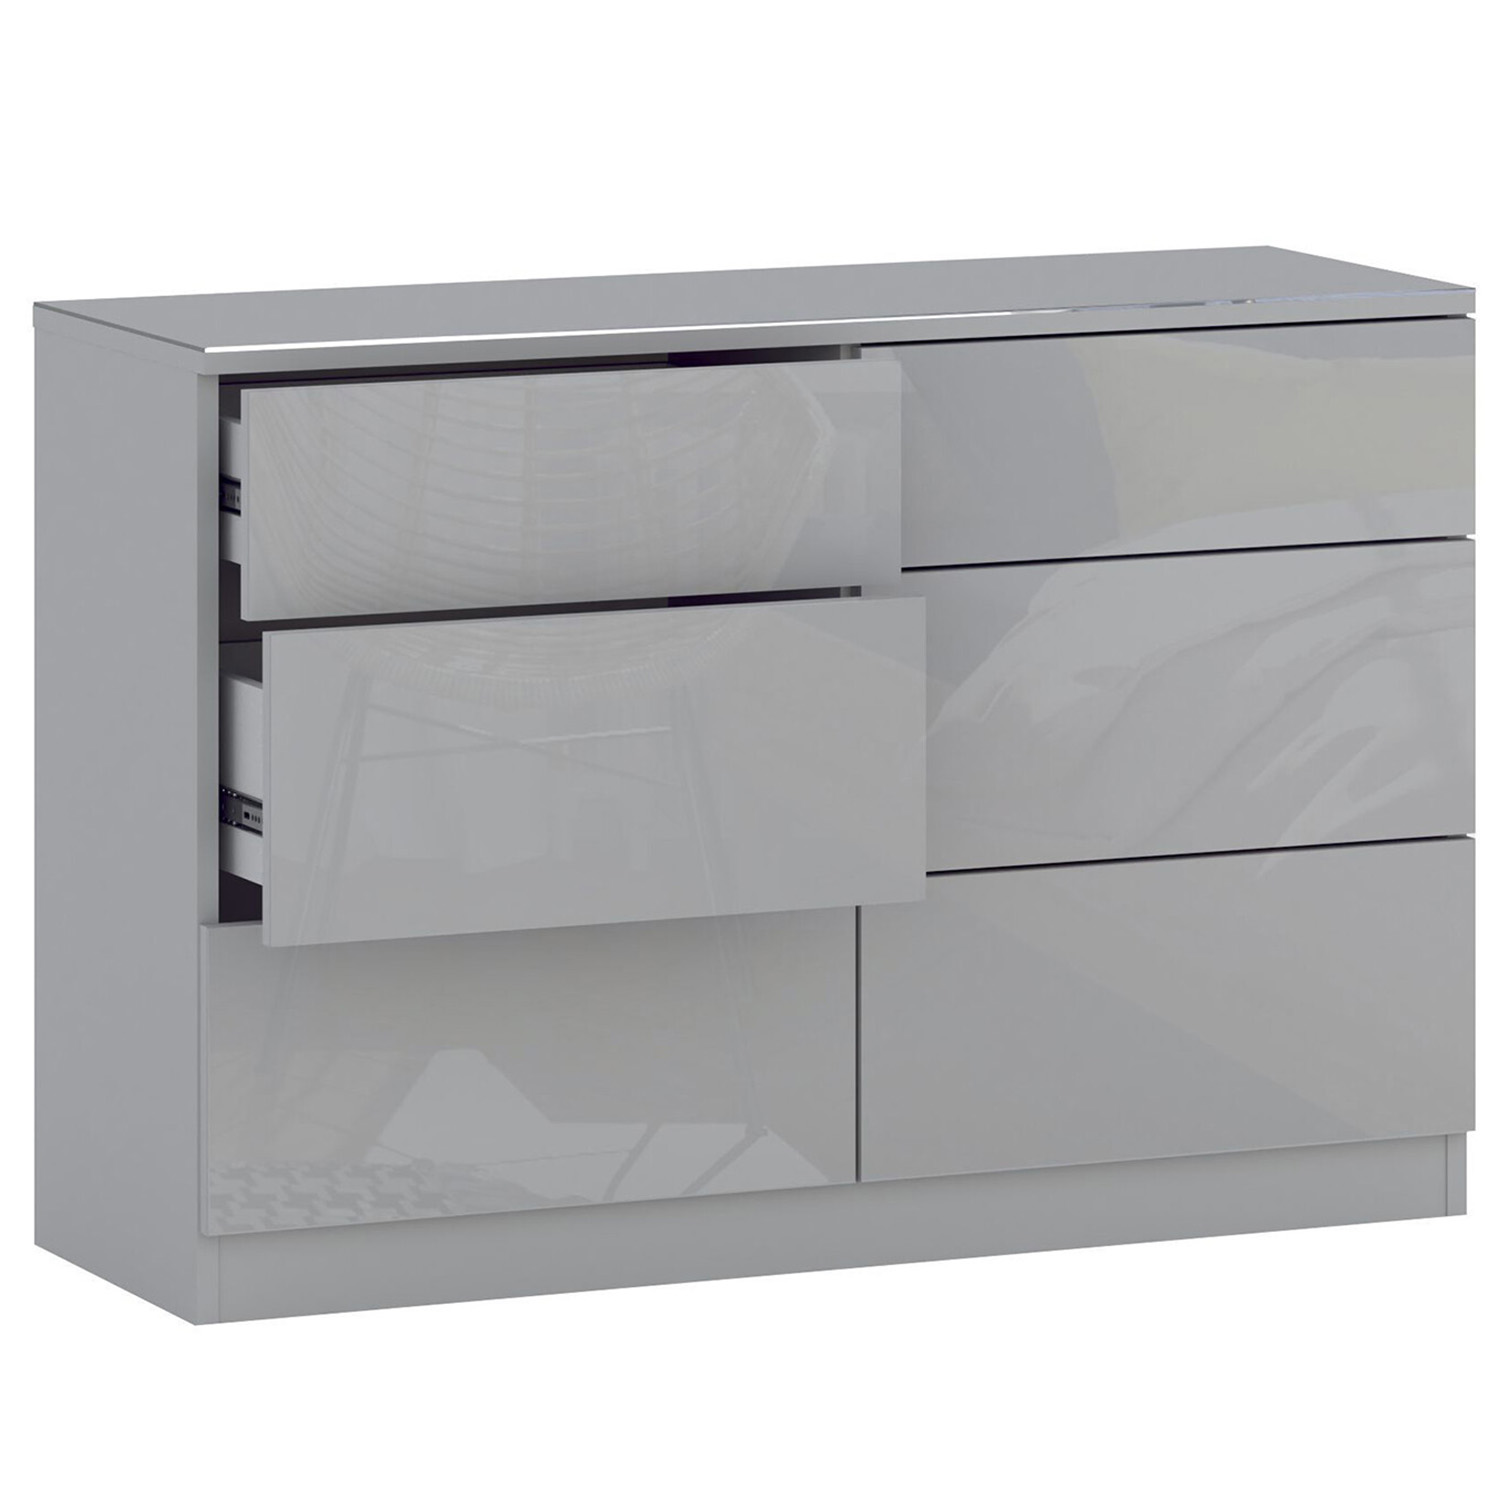 Shard 6 Drawer Glossy Grey Chest of Drawers Image 3